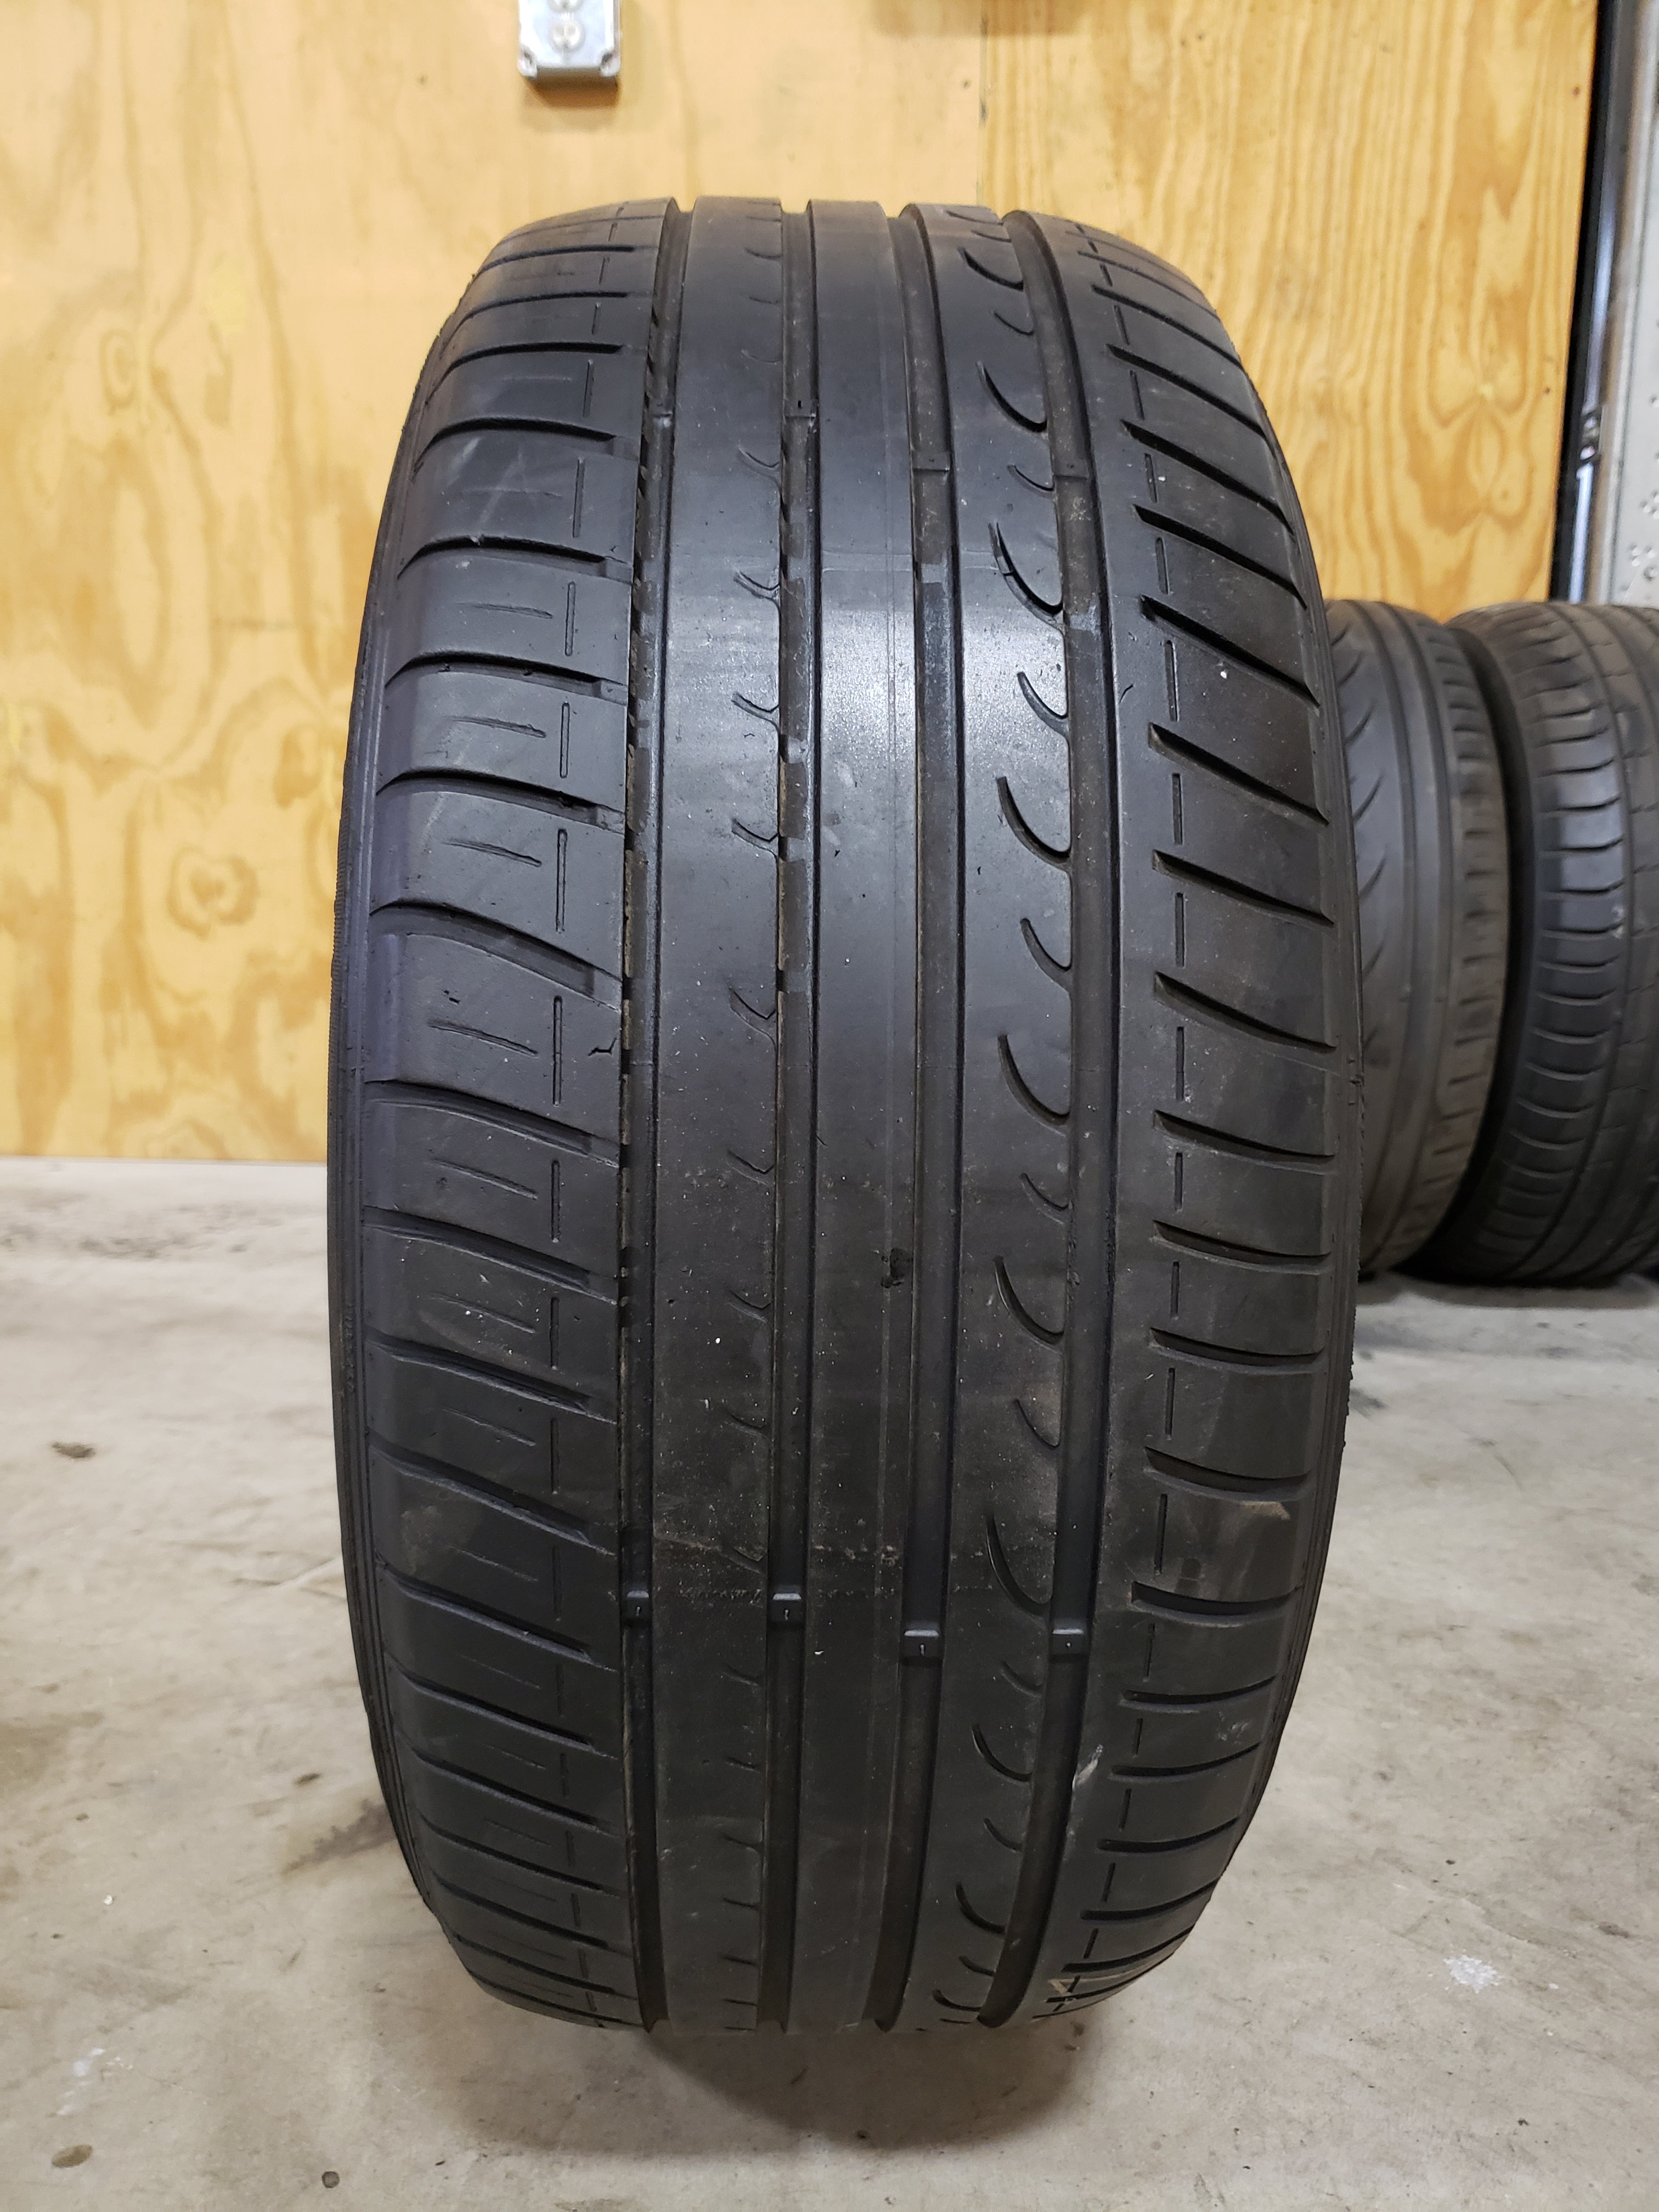 | Sport Tires Tires - Fast 95V XL – SP Used High Dunlop Response Used Tread SINGLE 225/55R16